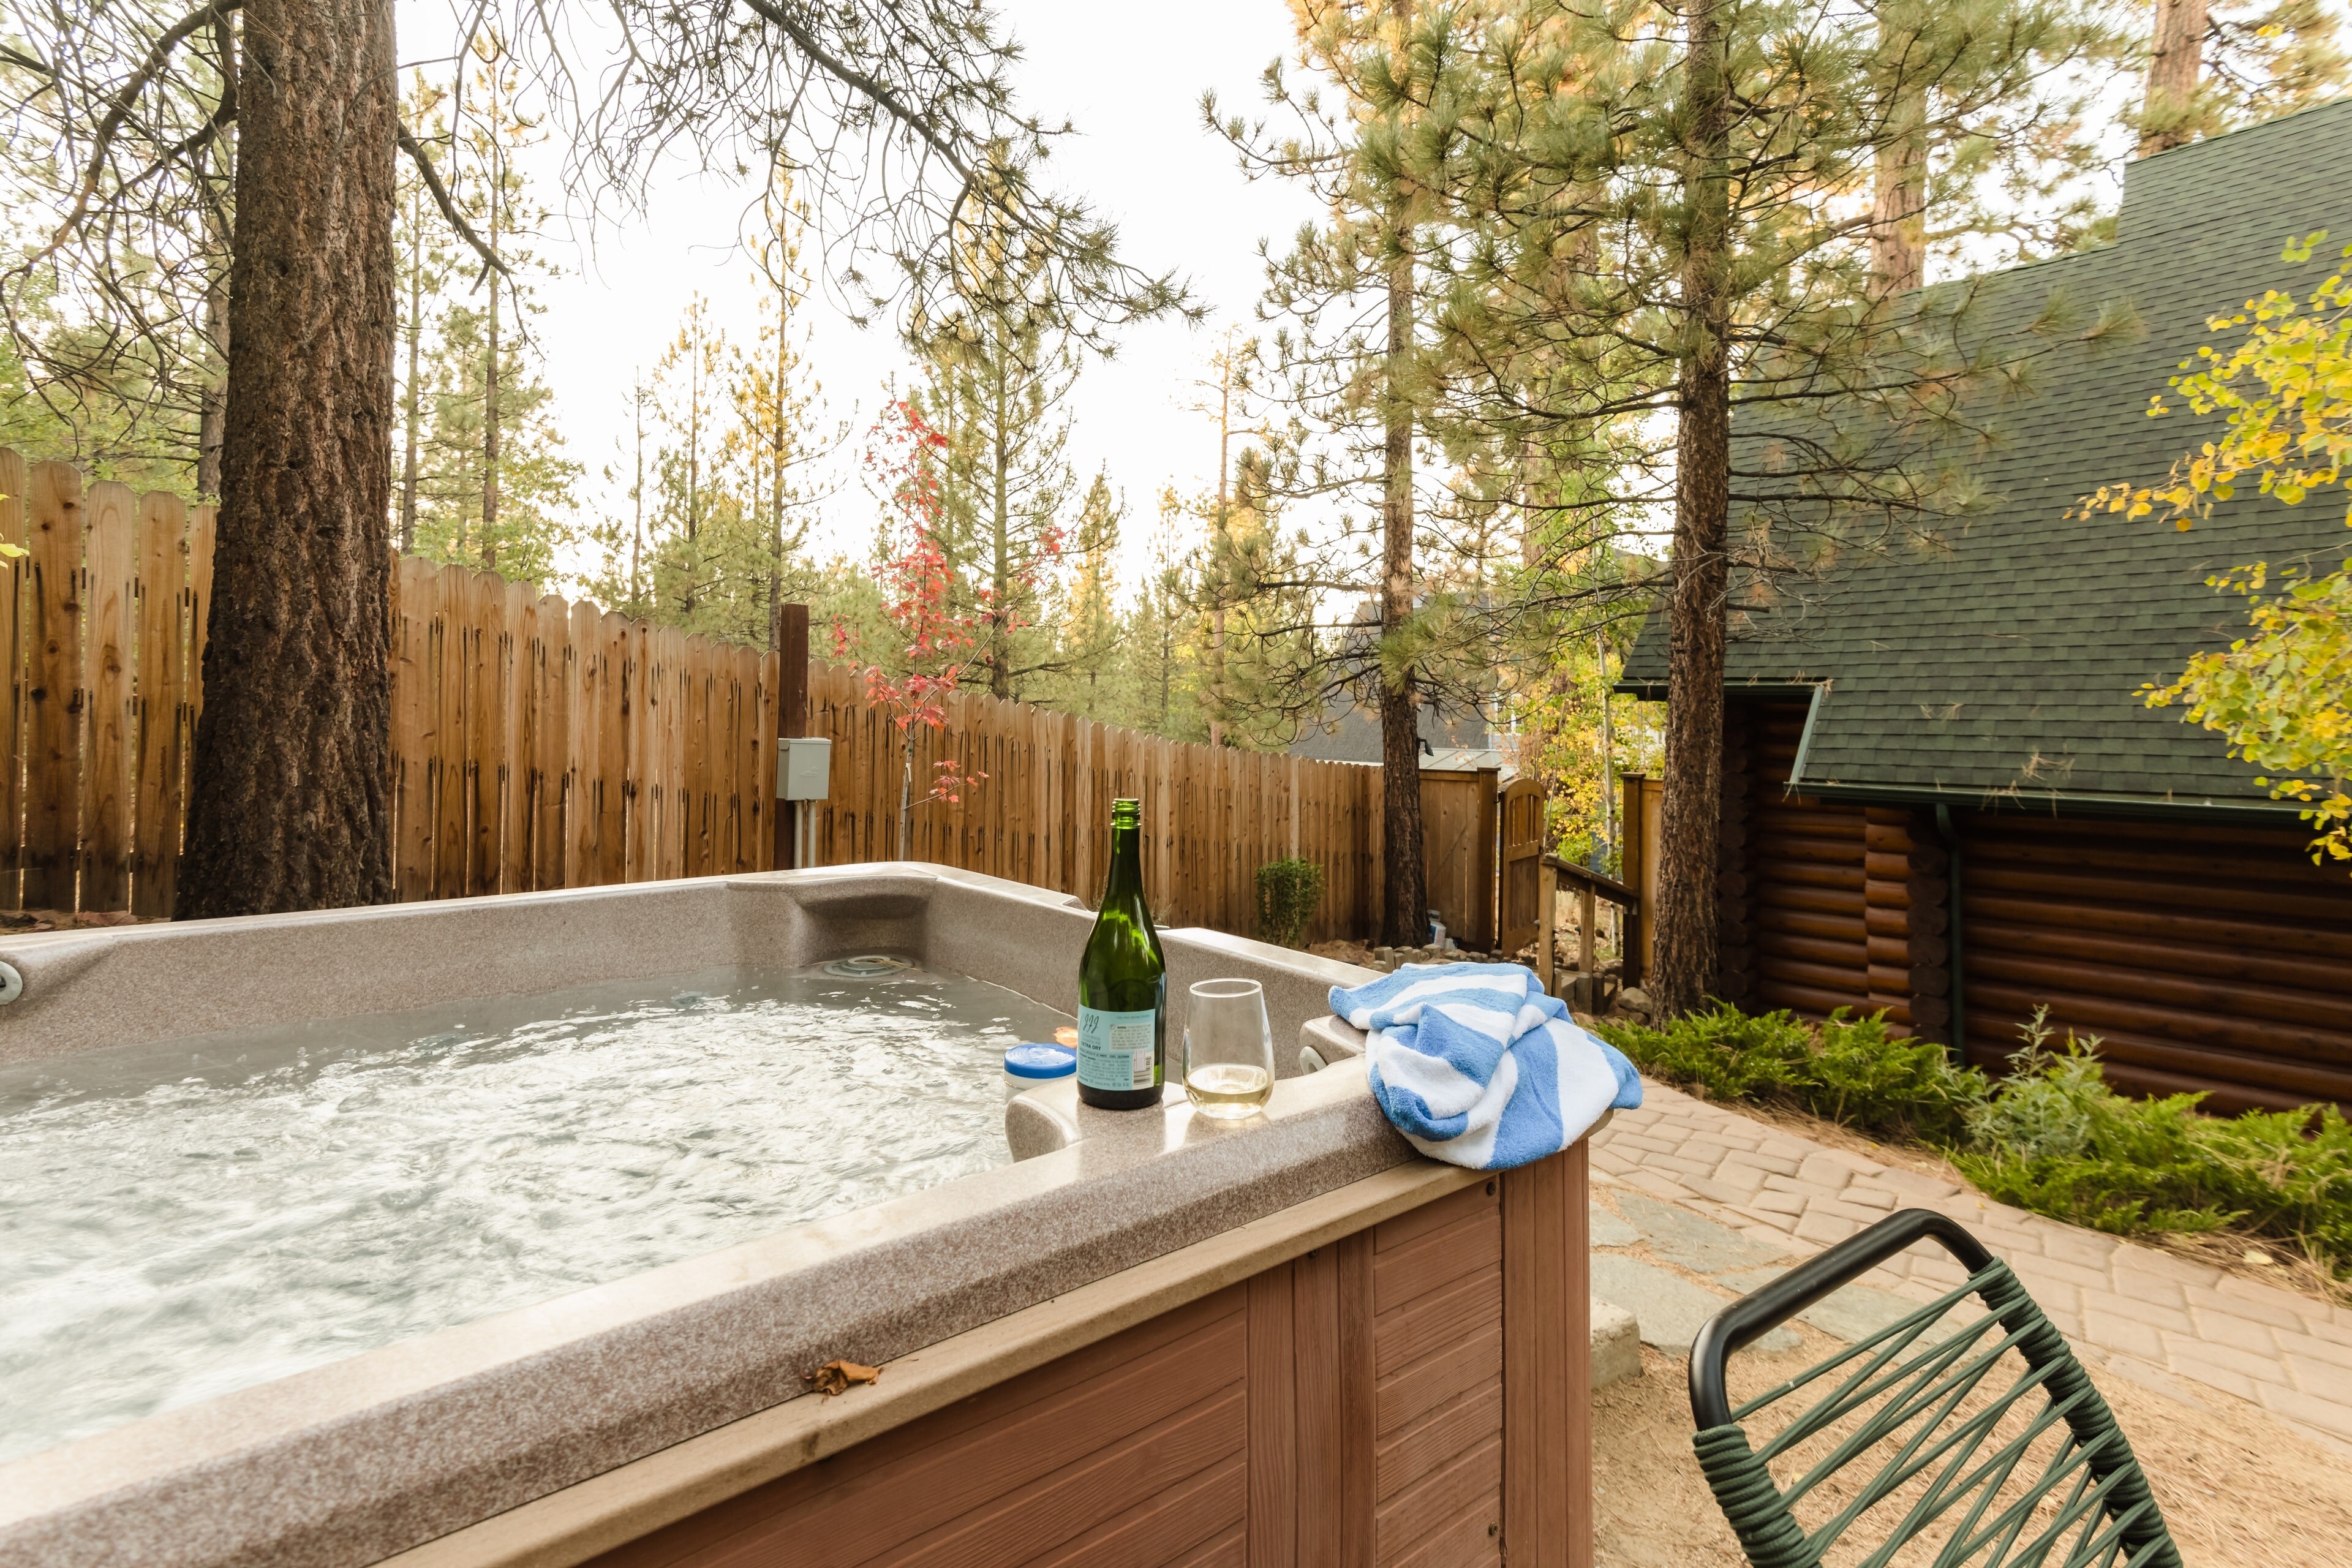 Take a dip in the hot tub.